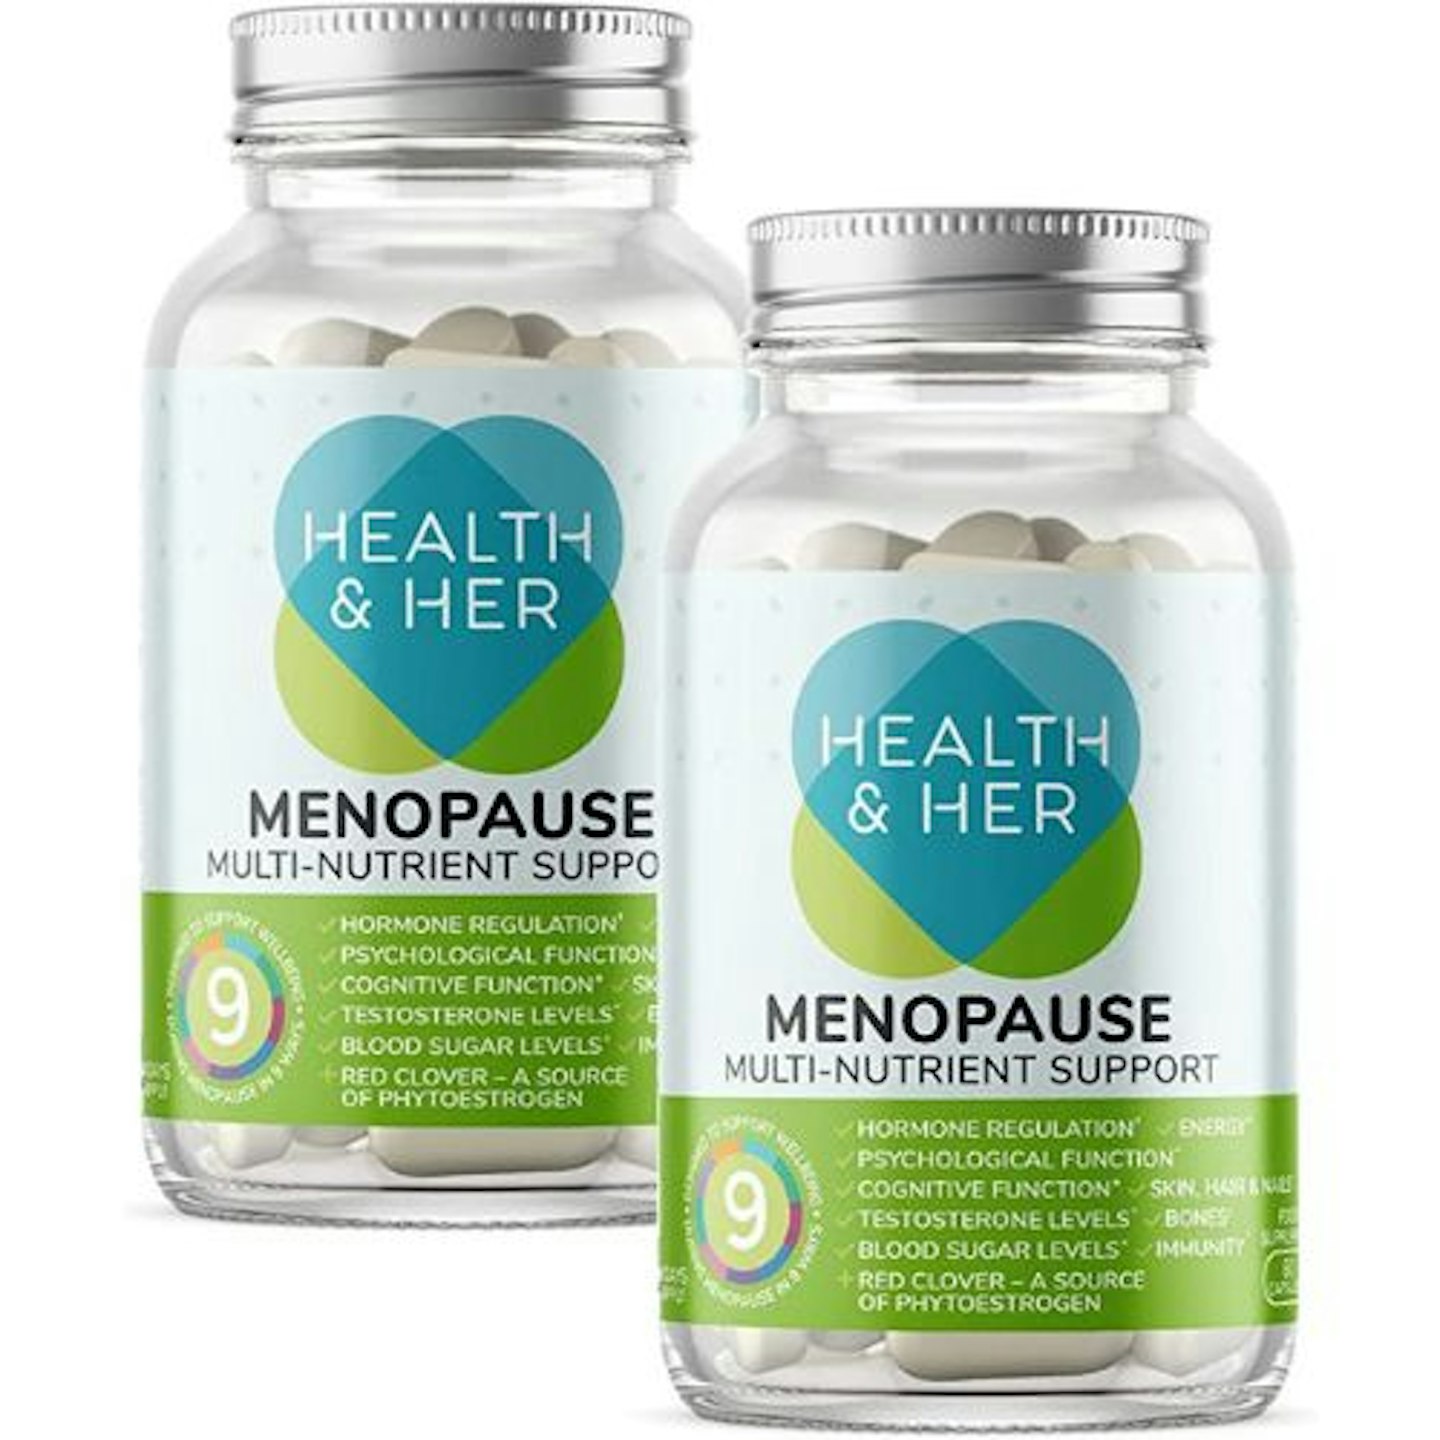 Health & Her Menopause Multi-Nutrient Support